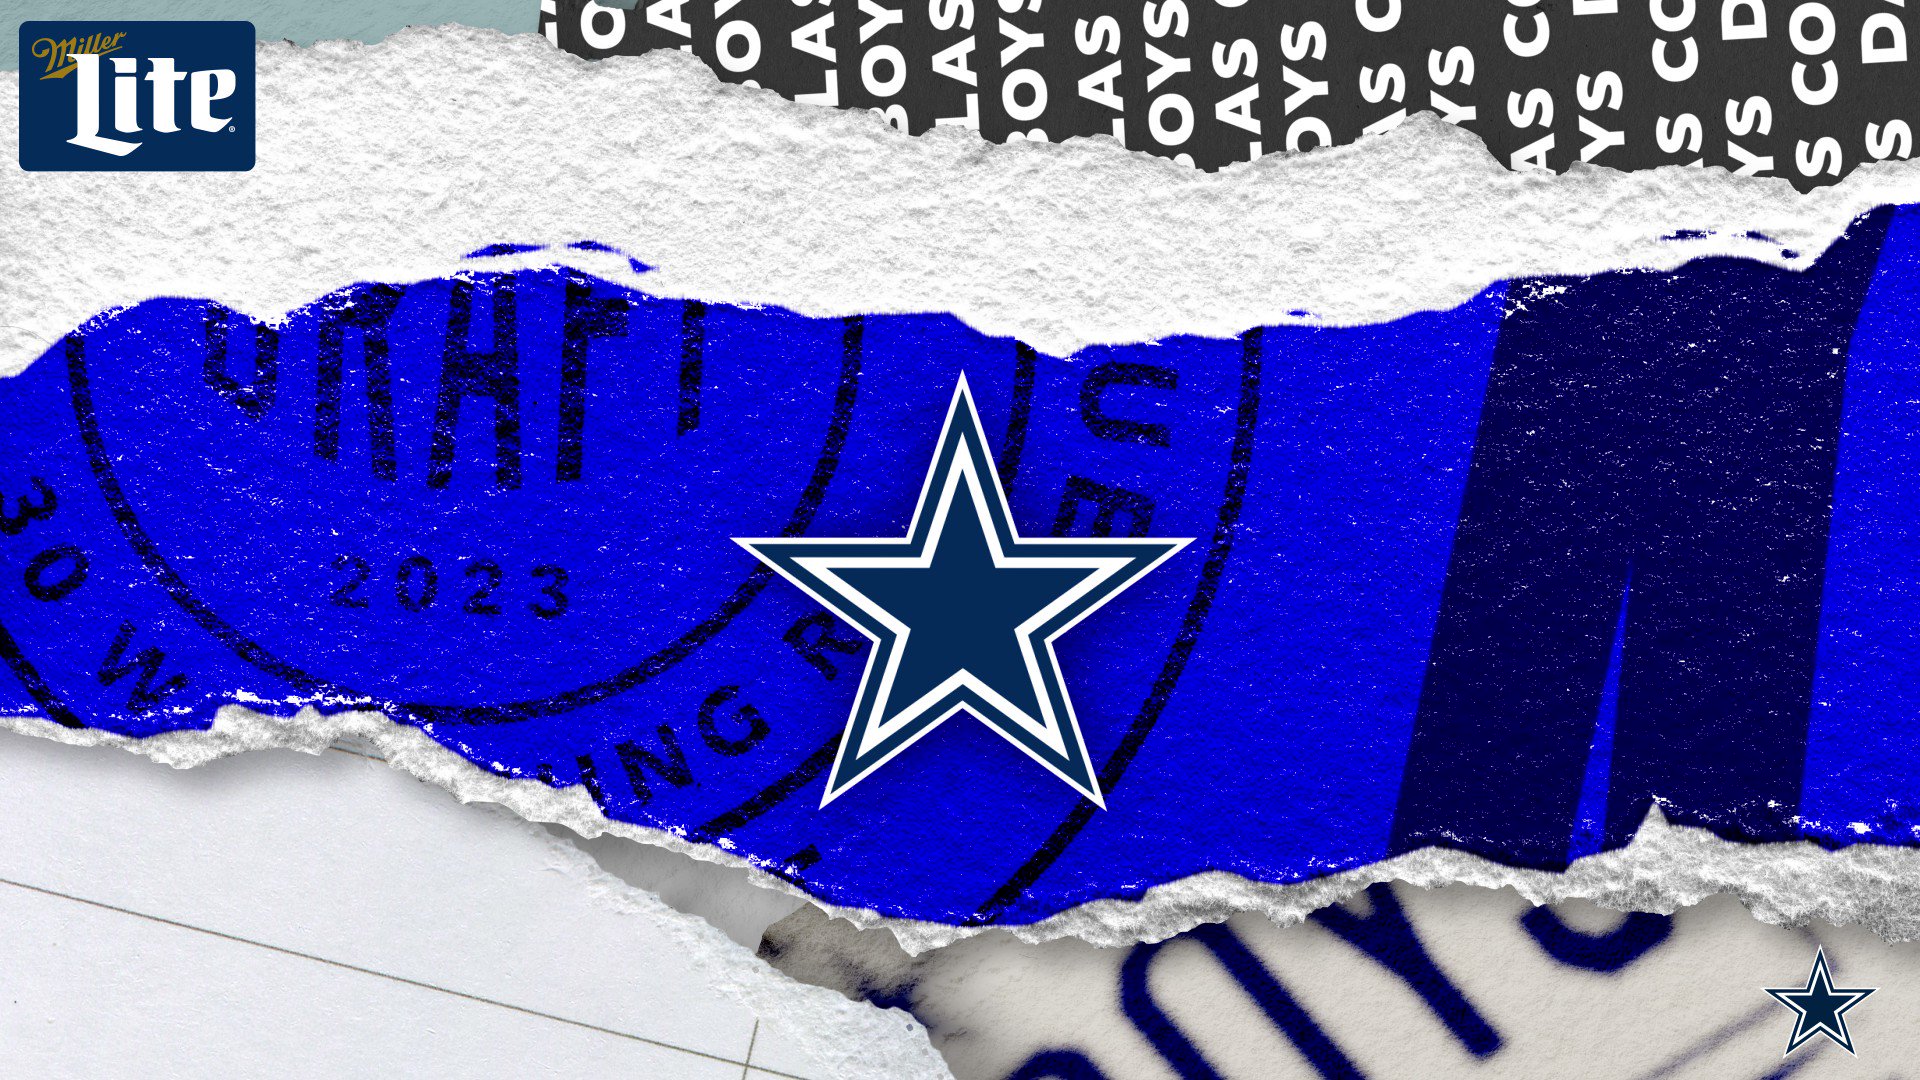 577073 high resolution wallpapers widescreen dallas cowboys  Rare Gallery  HD Wallpapers